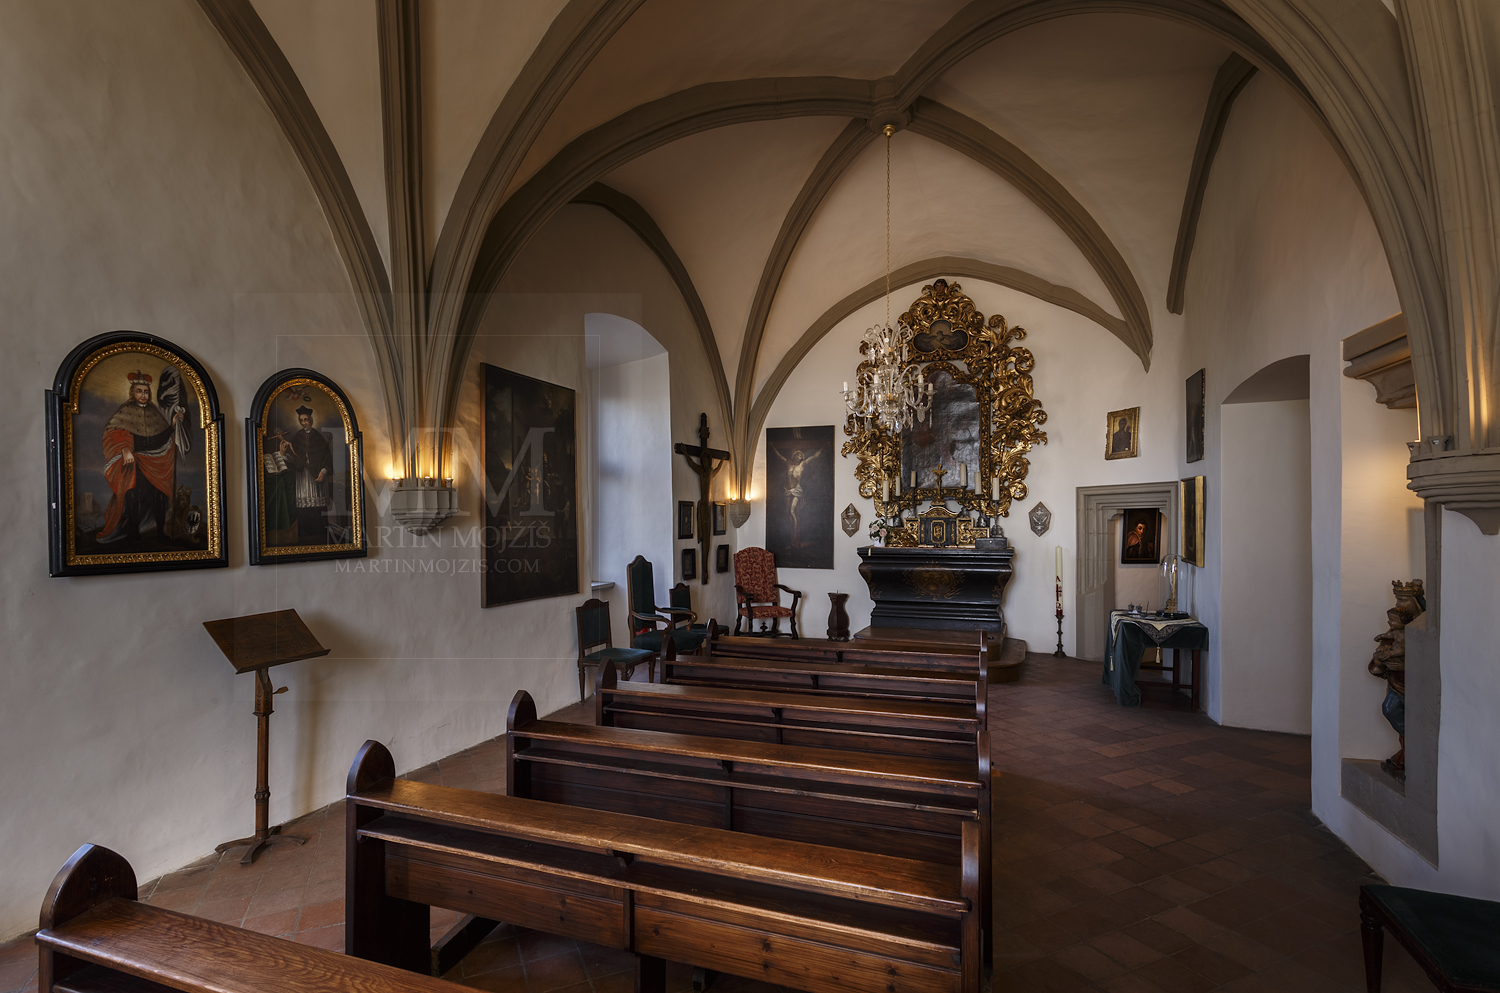 Chateau Melnik – chapel. Professional photography of architecture - interiors.